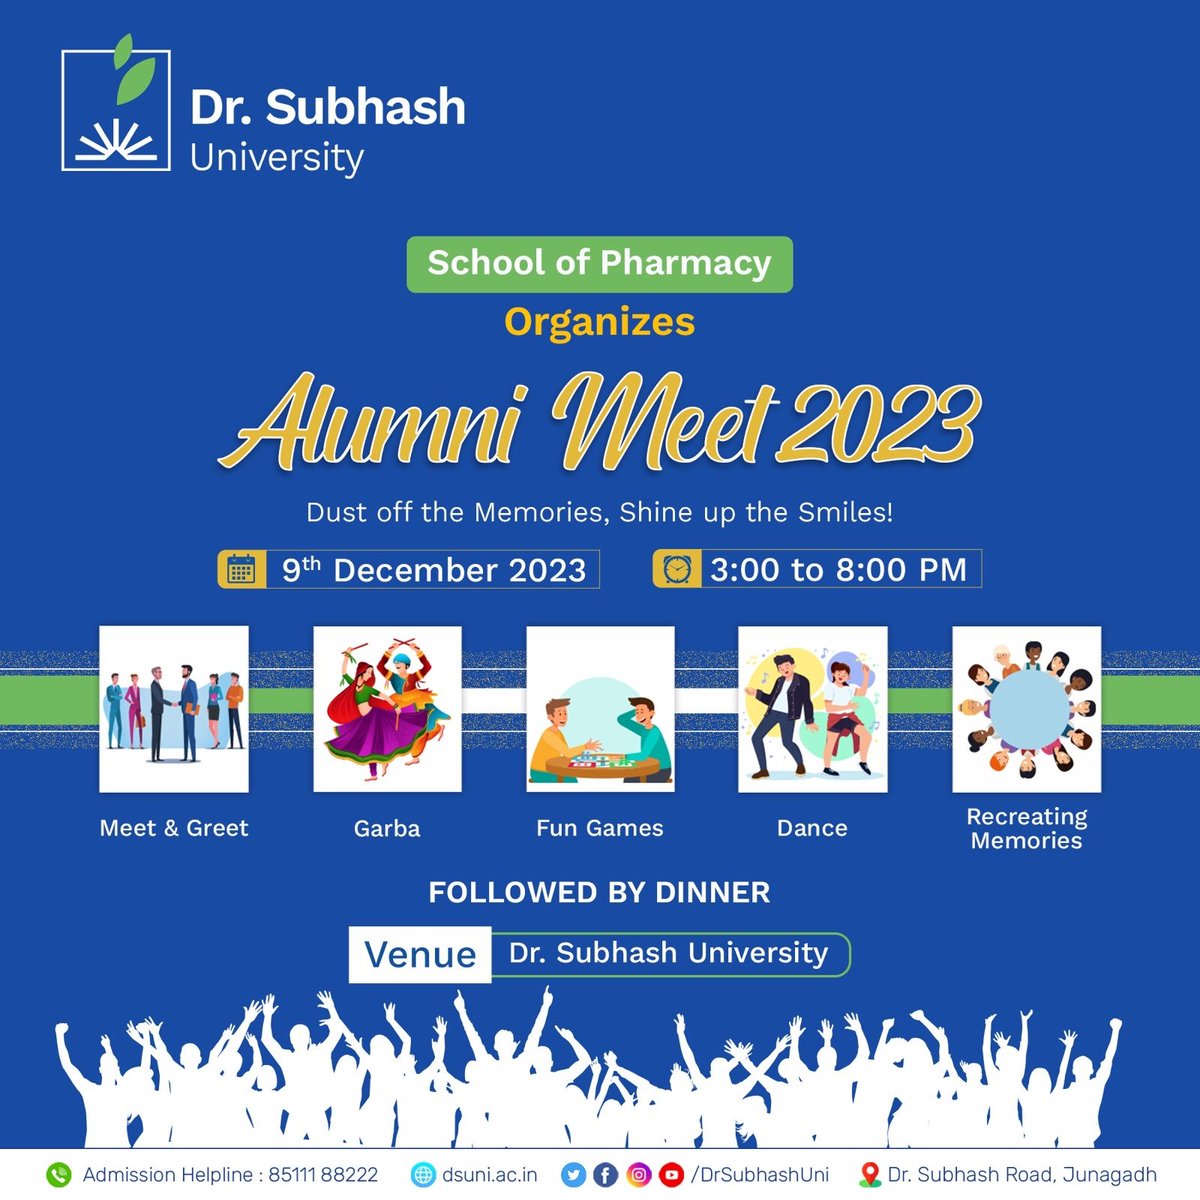 It's time to Reminisce!! 🎉 Get Ready for Alumni Meet 2023...

Relive the golden moments, catch up with the old batch mates & recall the golden days you've spent here...

Looking forward for your gracious presence. 🌟

#schoolofpharmacy #alumnimeet
#DSU #DrSubhashUniversity